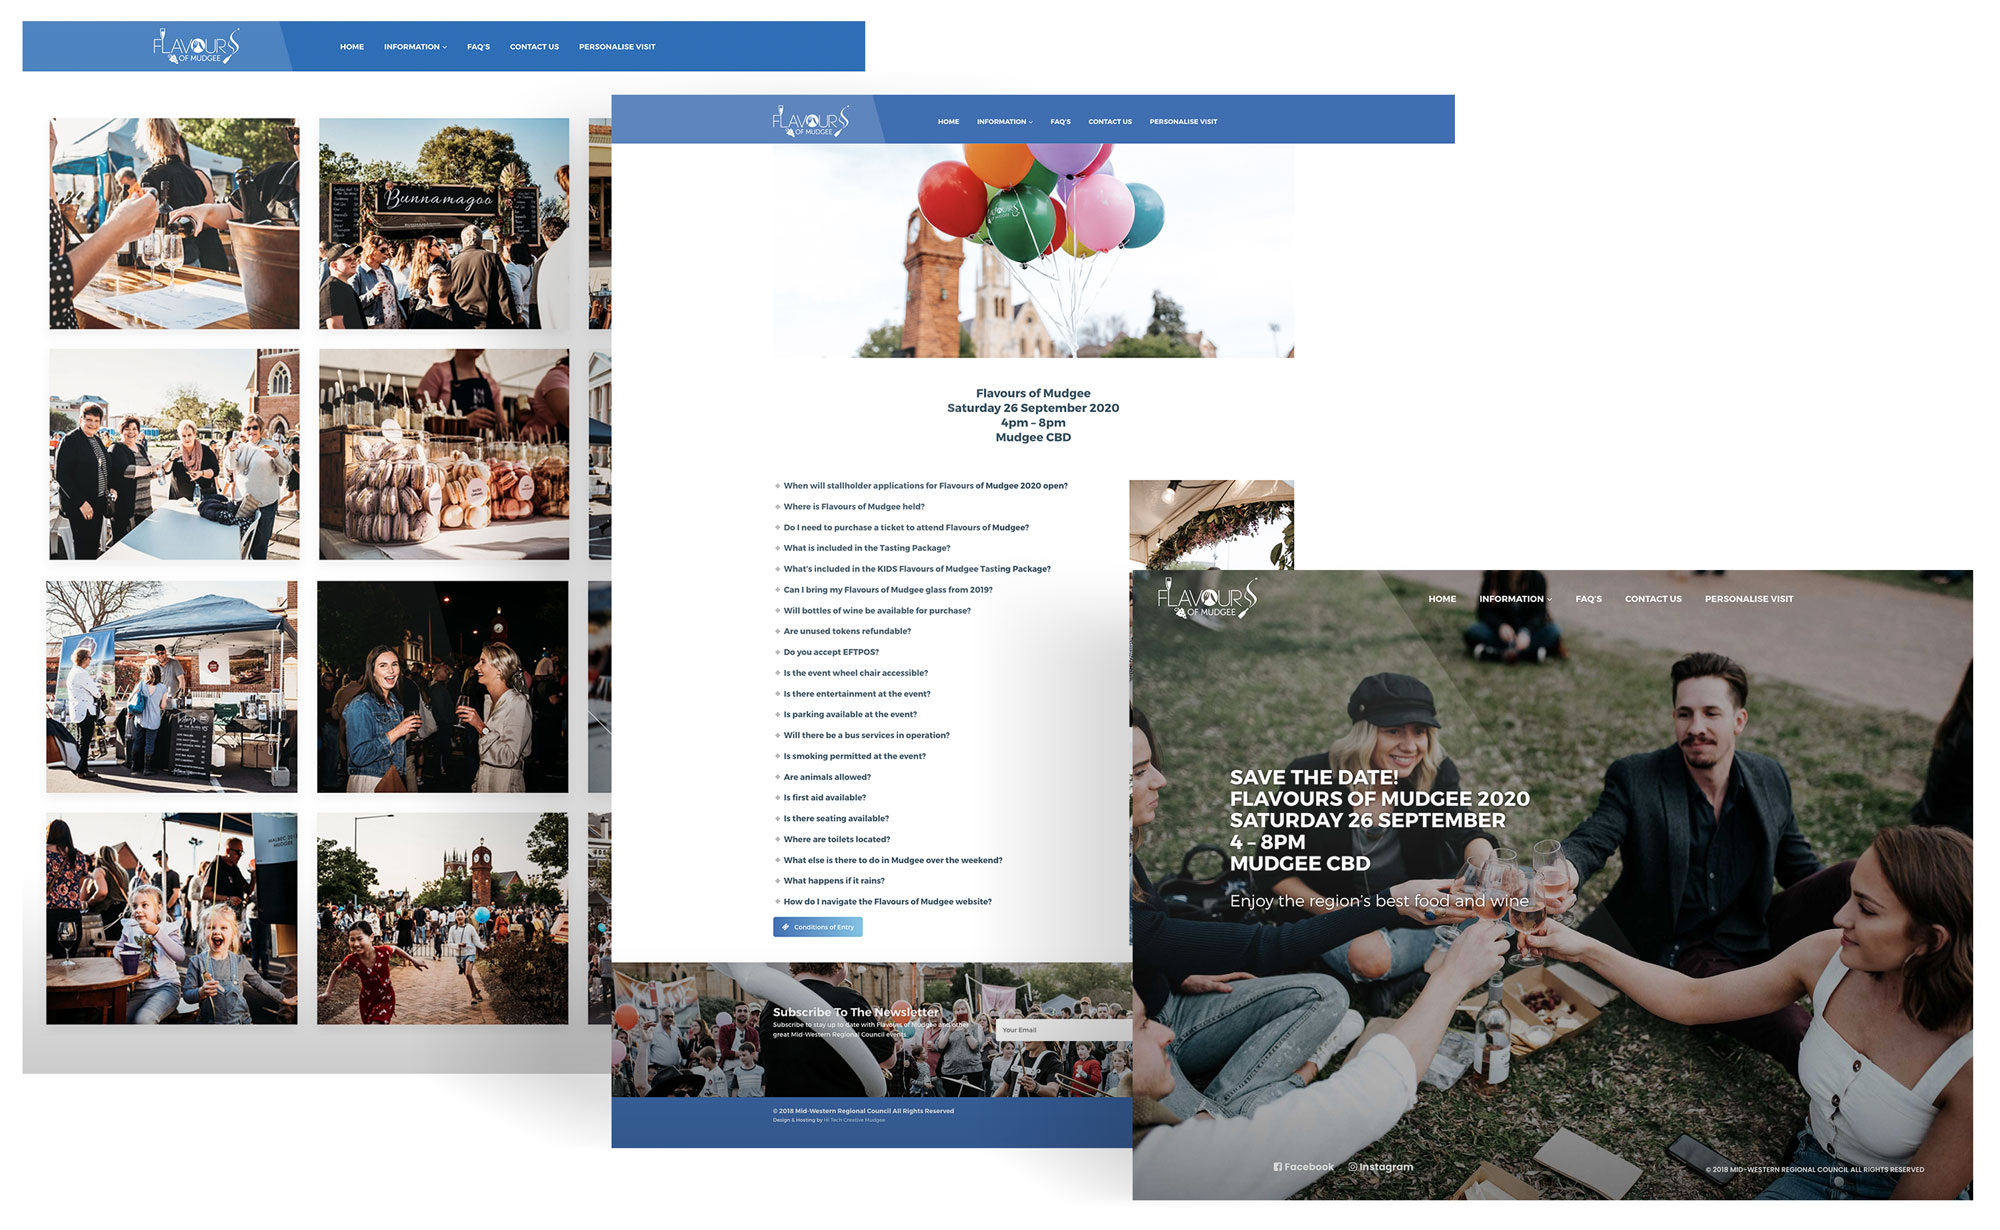 Flavours of Mudgee website layout